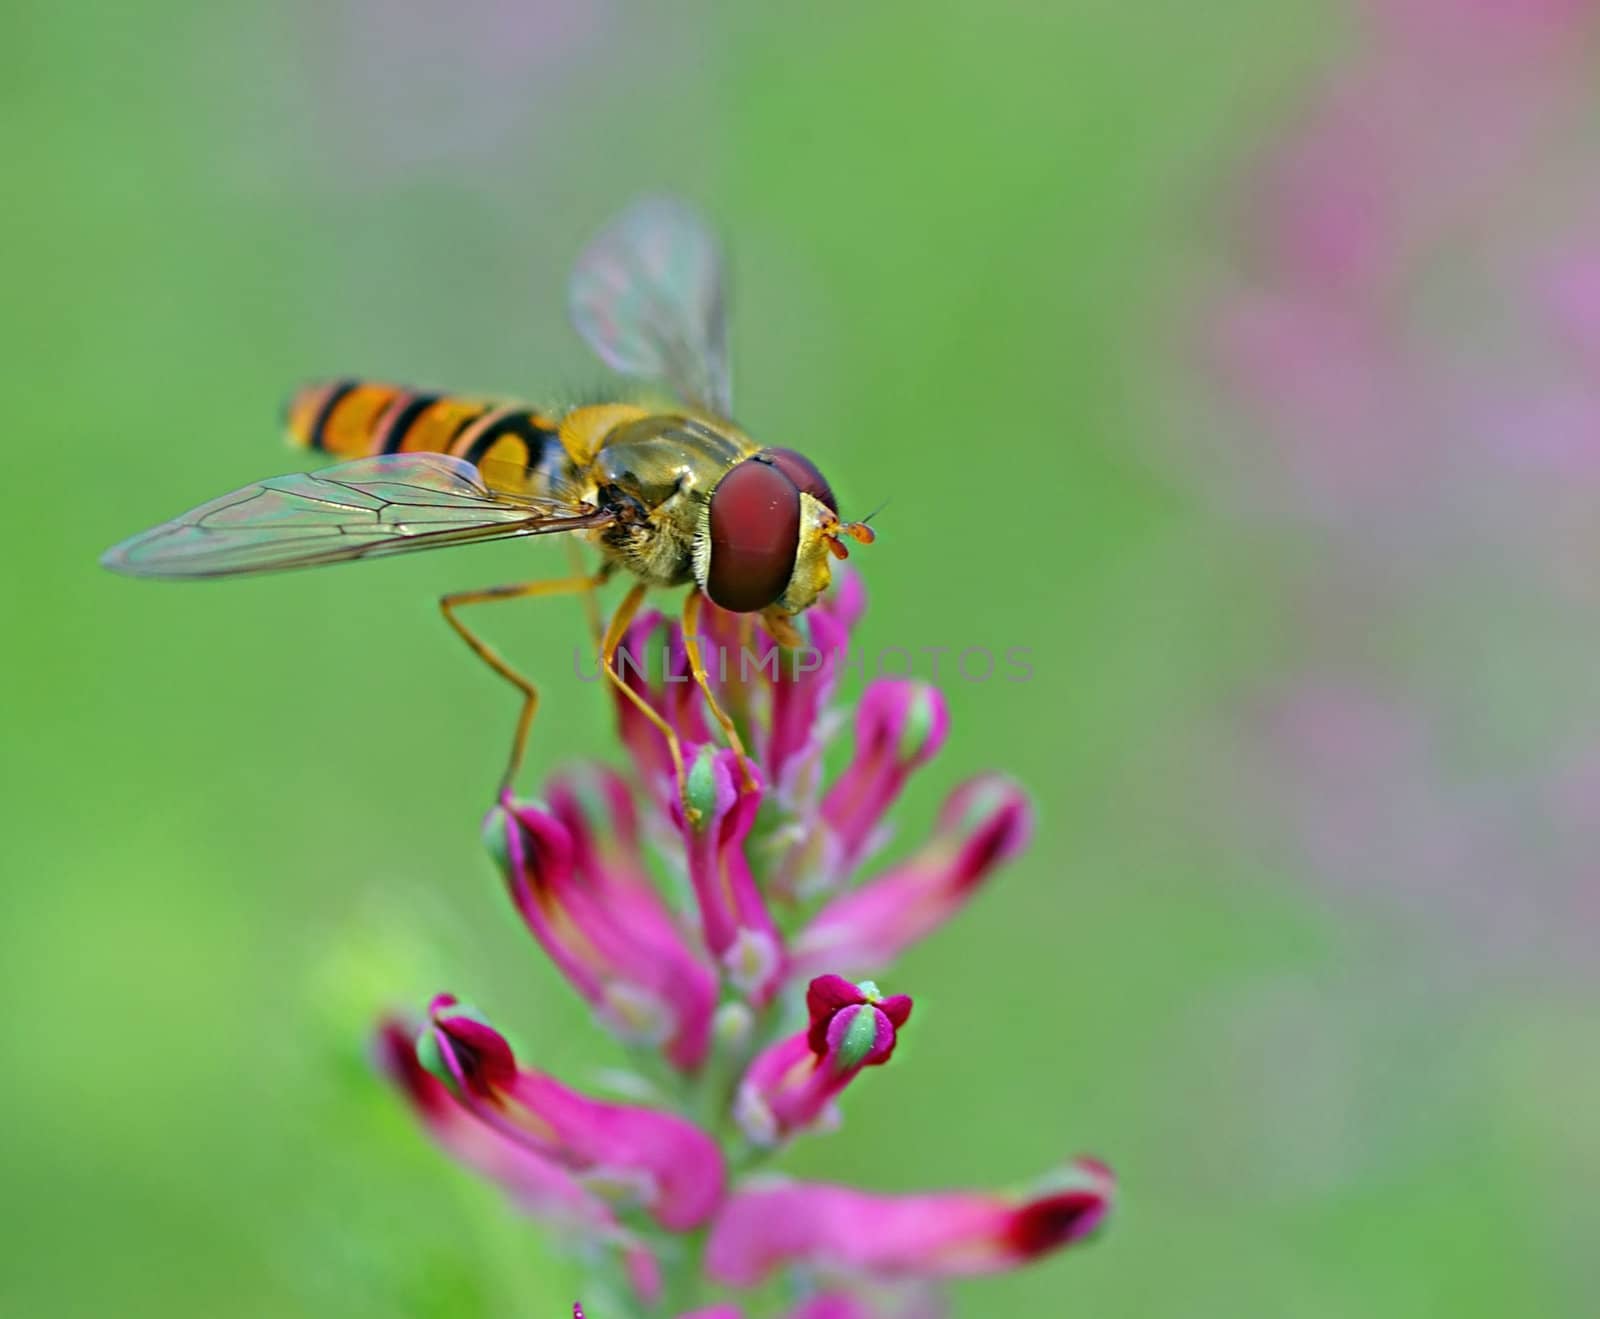 Hoverfly positioned on flower for finding food by baggiovara